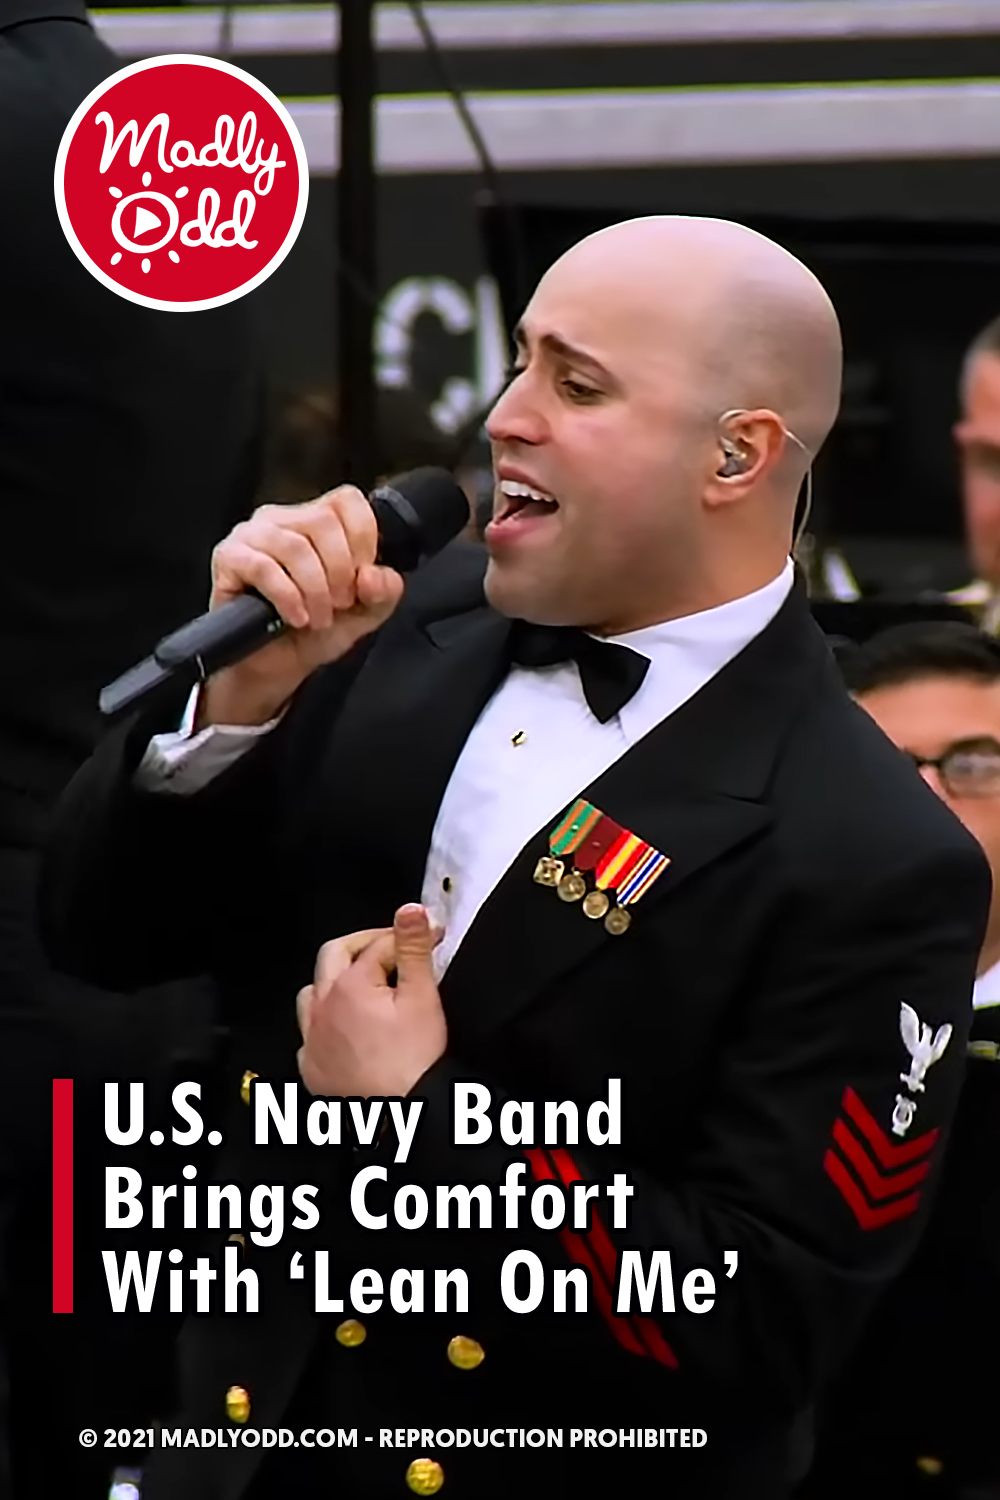 U.S. Navy Band Brings Comfort With \'Lean On Me\'